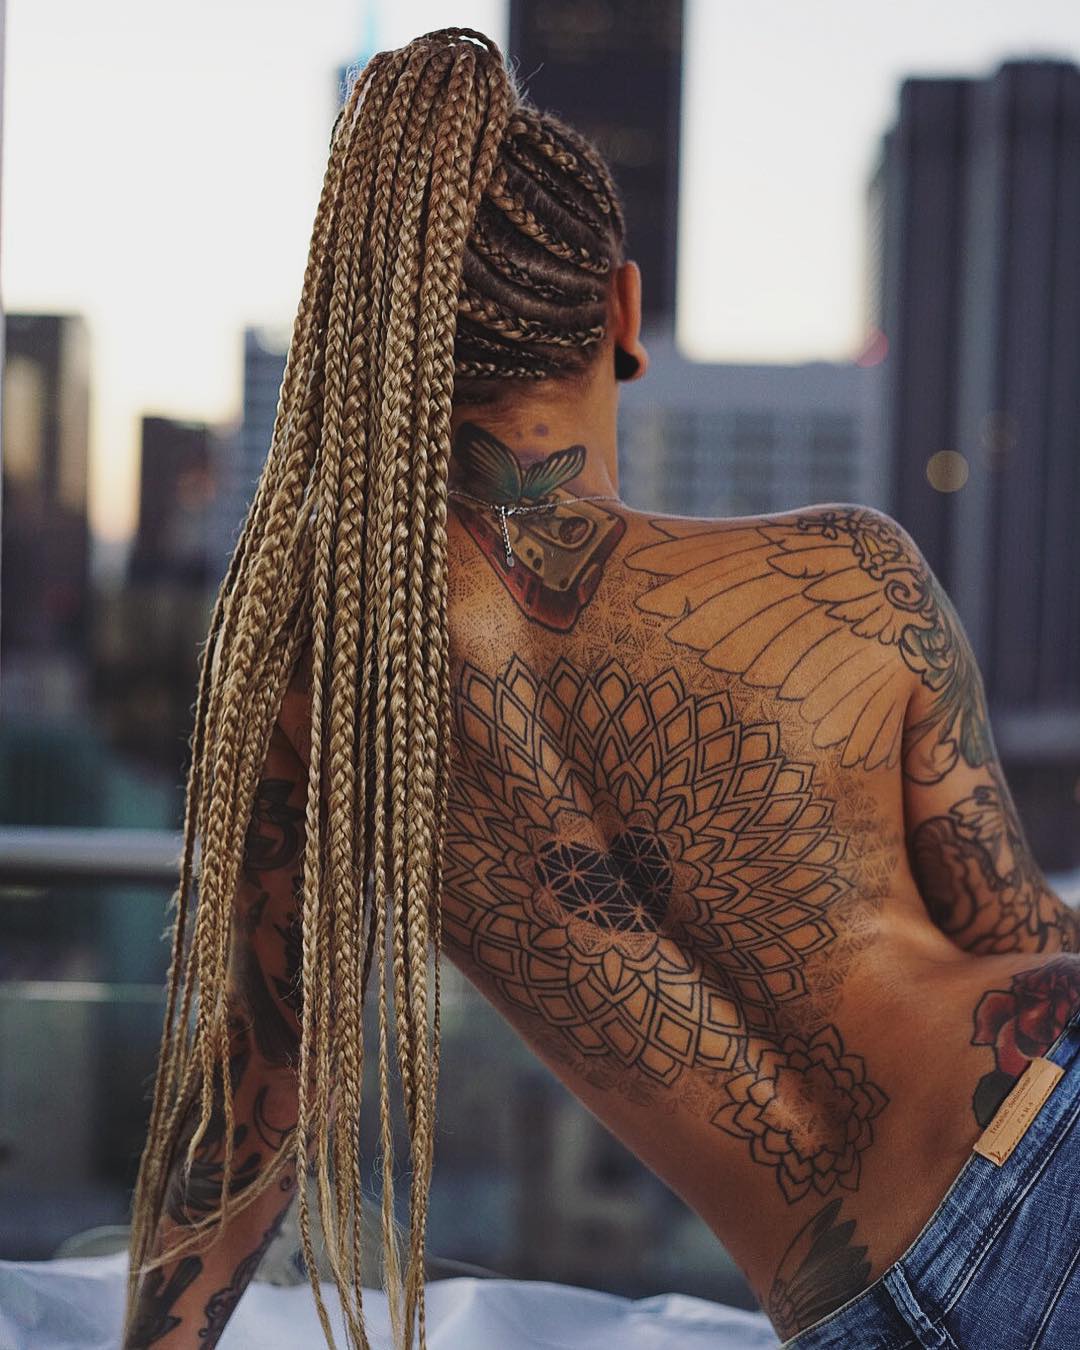 10 Beautiful Tattoos For Dark Skin To Turn Yourself Into A Piece Of Art